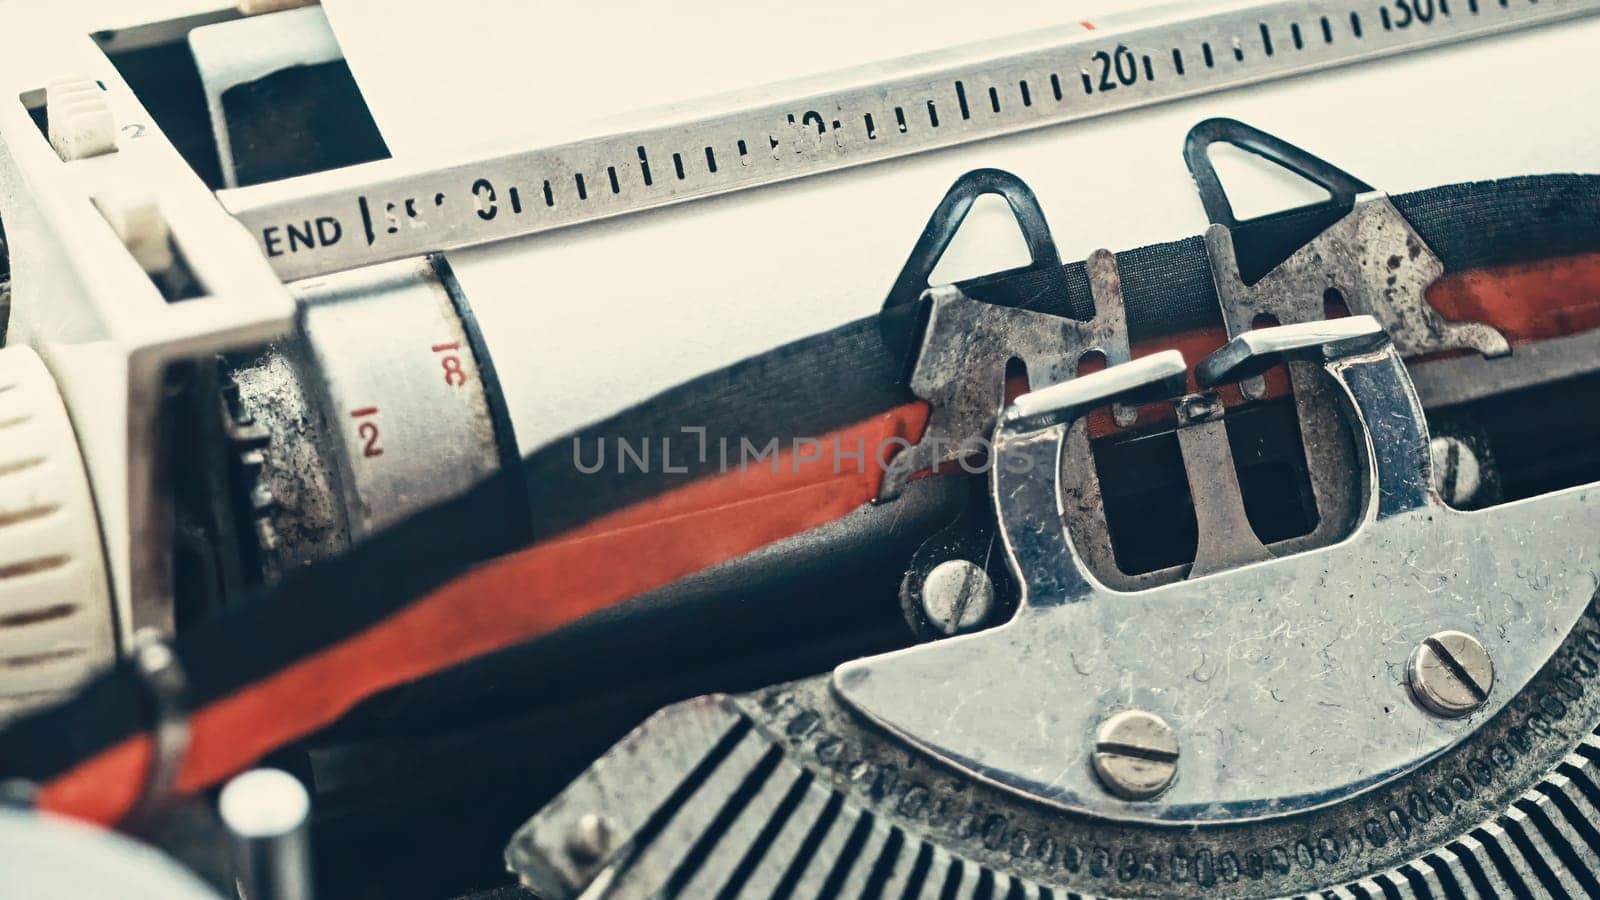 Vintage typewriter with with empty paper, close up view